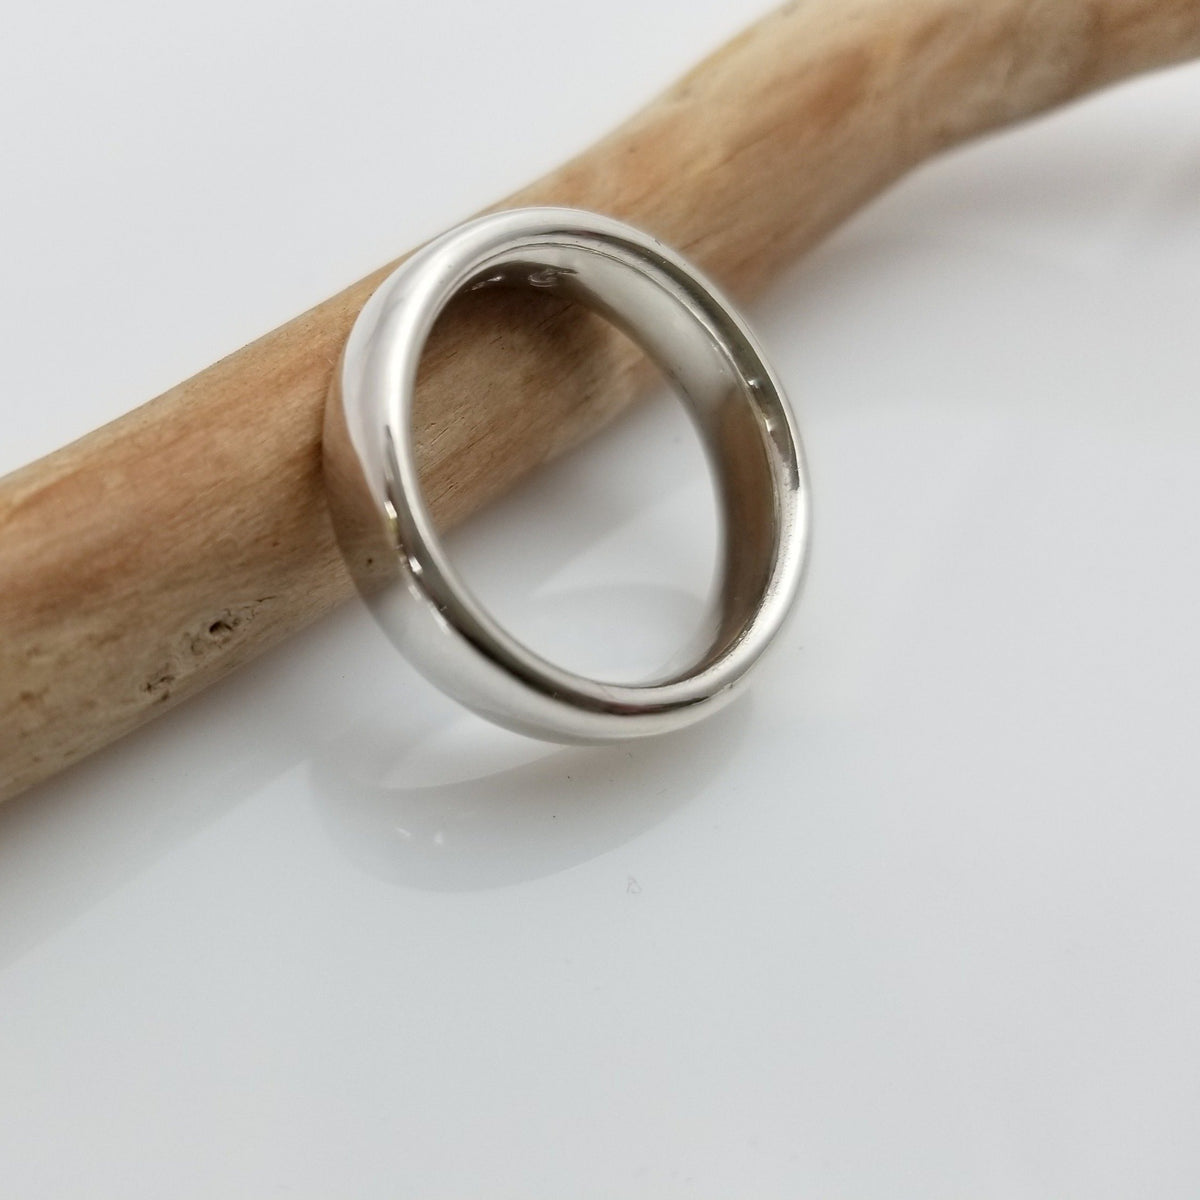 New moon sterling silver ring